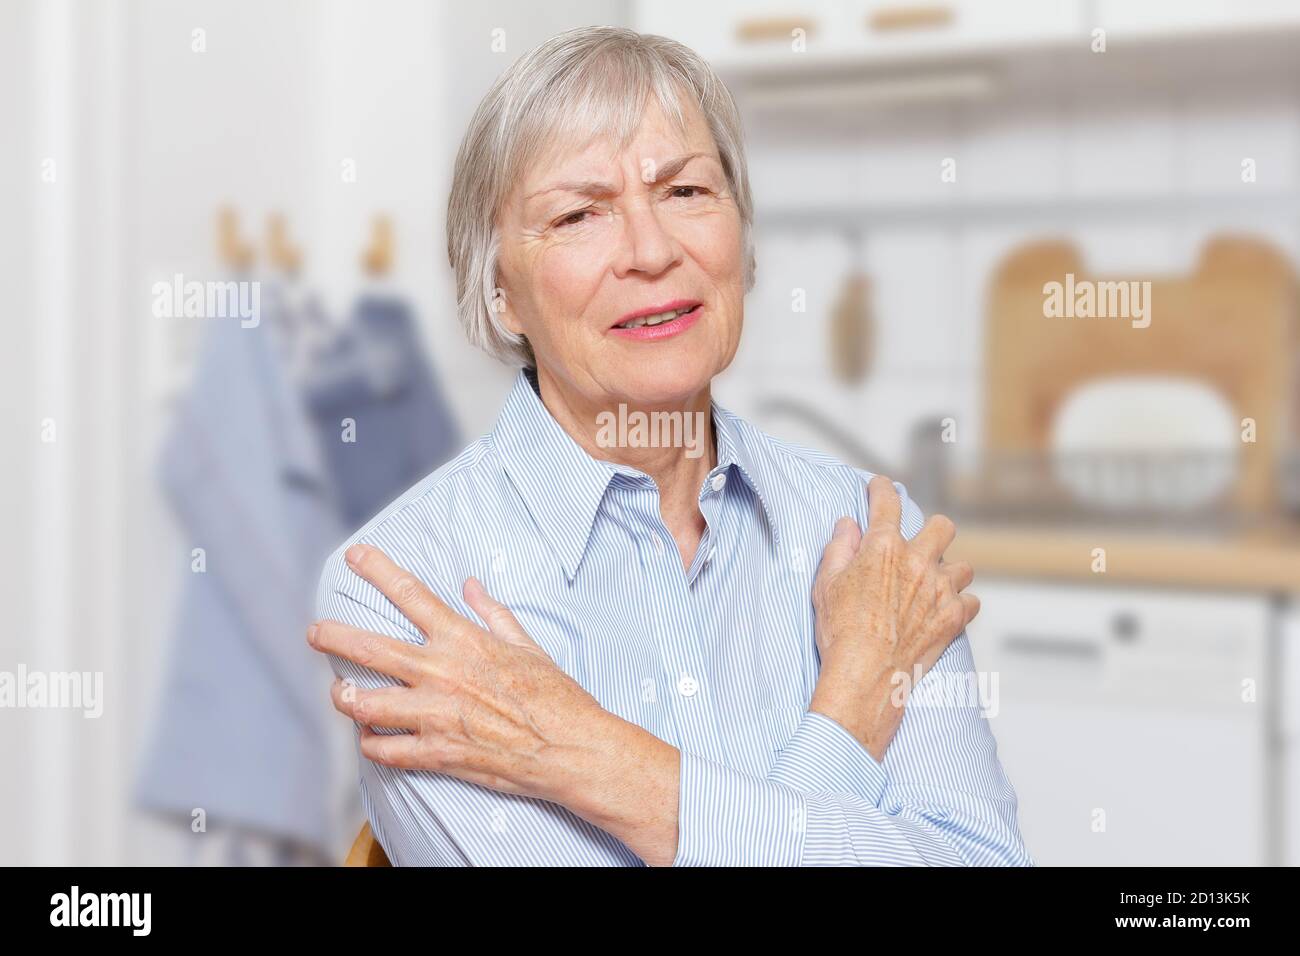 Polymyalgia rheumatica: elderly woman with acute pain in her upper arms and shoulders. Stock Photo